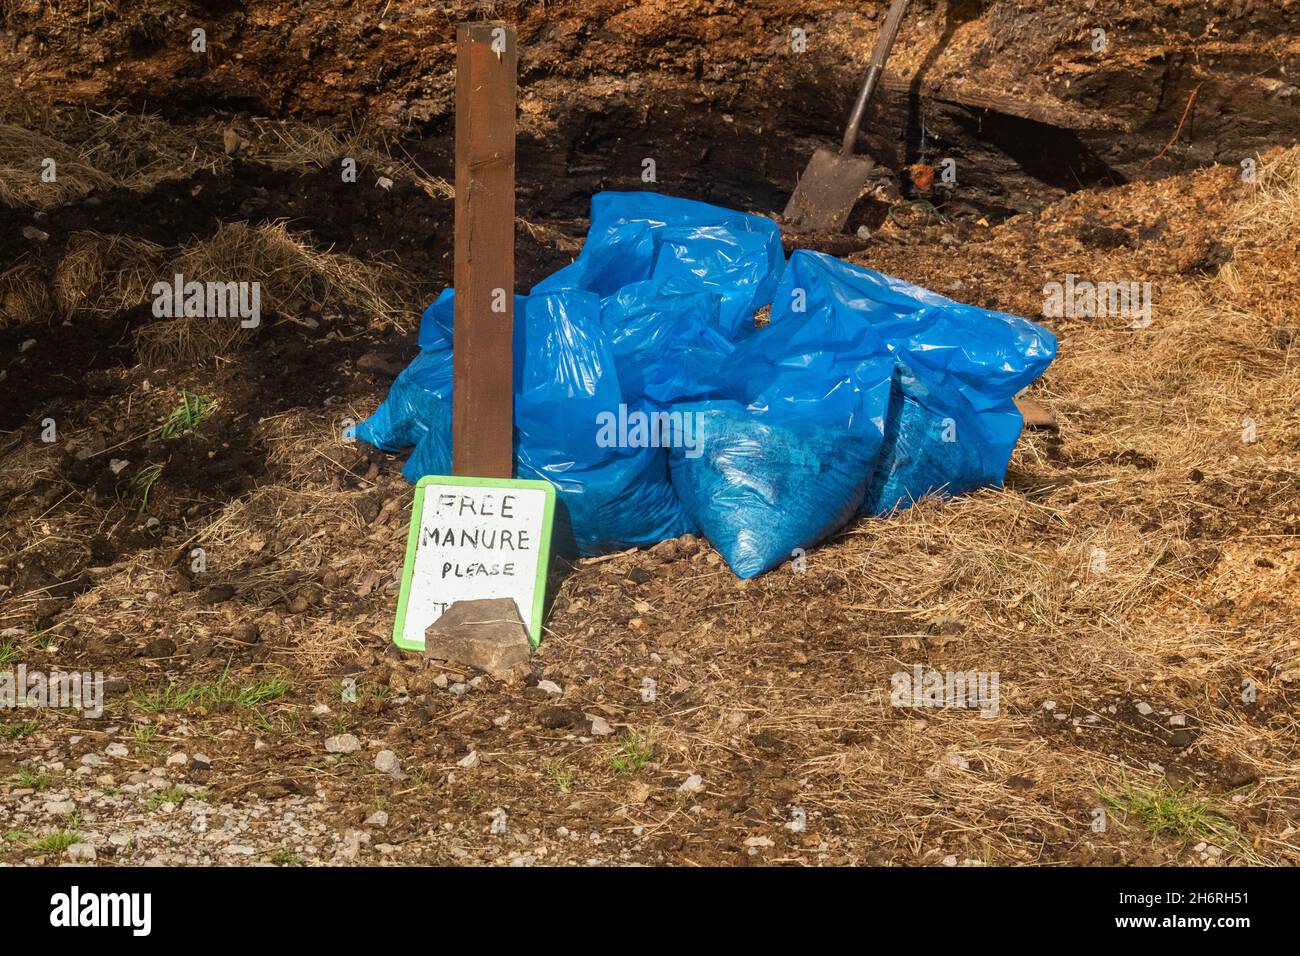 A pile of manure next to stables. The horse owner has manure bagged up to give away to local gardeners. Stock Photo